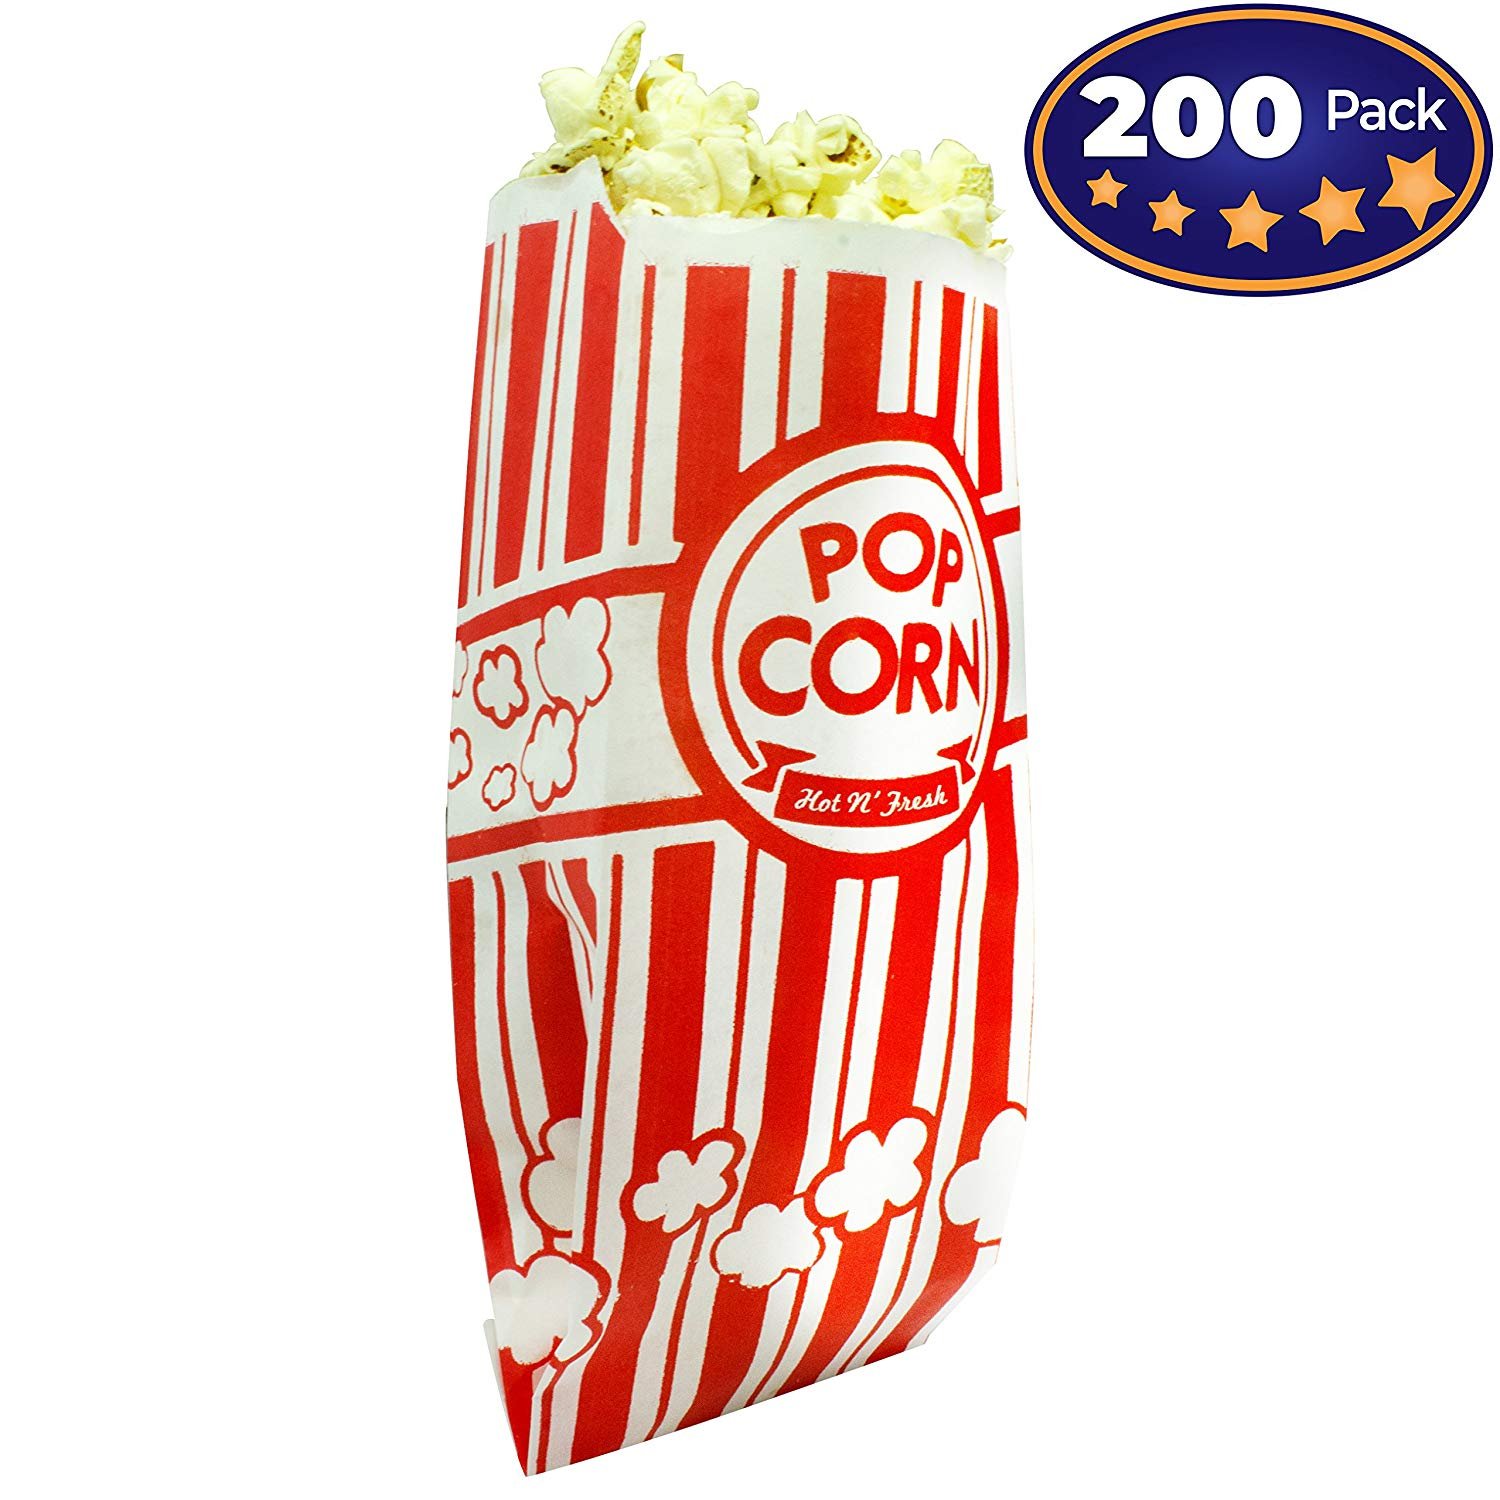 Sturdy Paper Bag 200 Popcorn Bags Large 2 Once Movies Perfect Size for Theater Popcorn Bags for Party by Liquor Sip Birthday Parties Celebration Great Carnival Light Snacking Bags